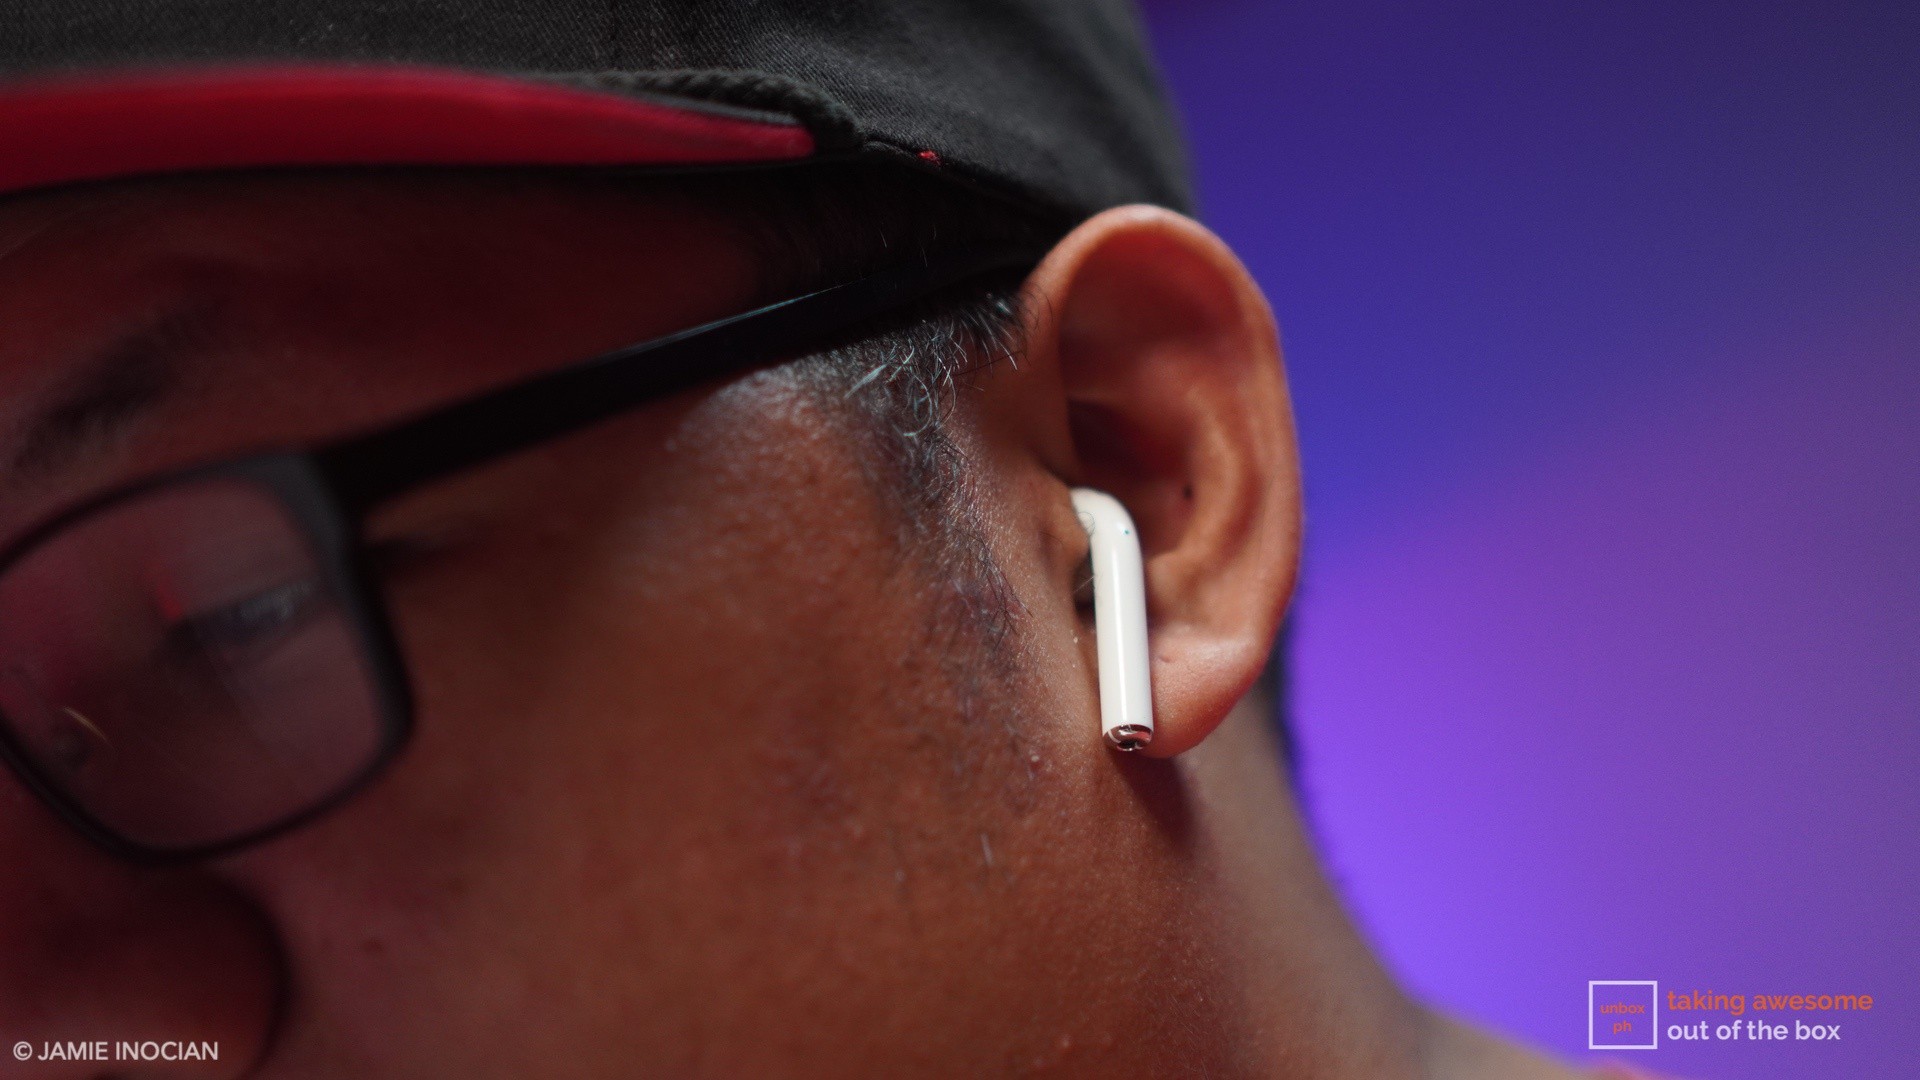 Audio Quality of the Apple Airpods 2 vs. Huawei FreeBuds 3